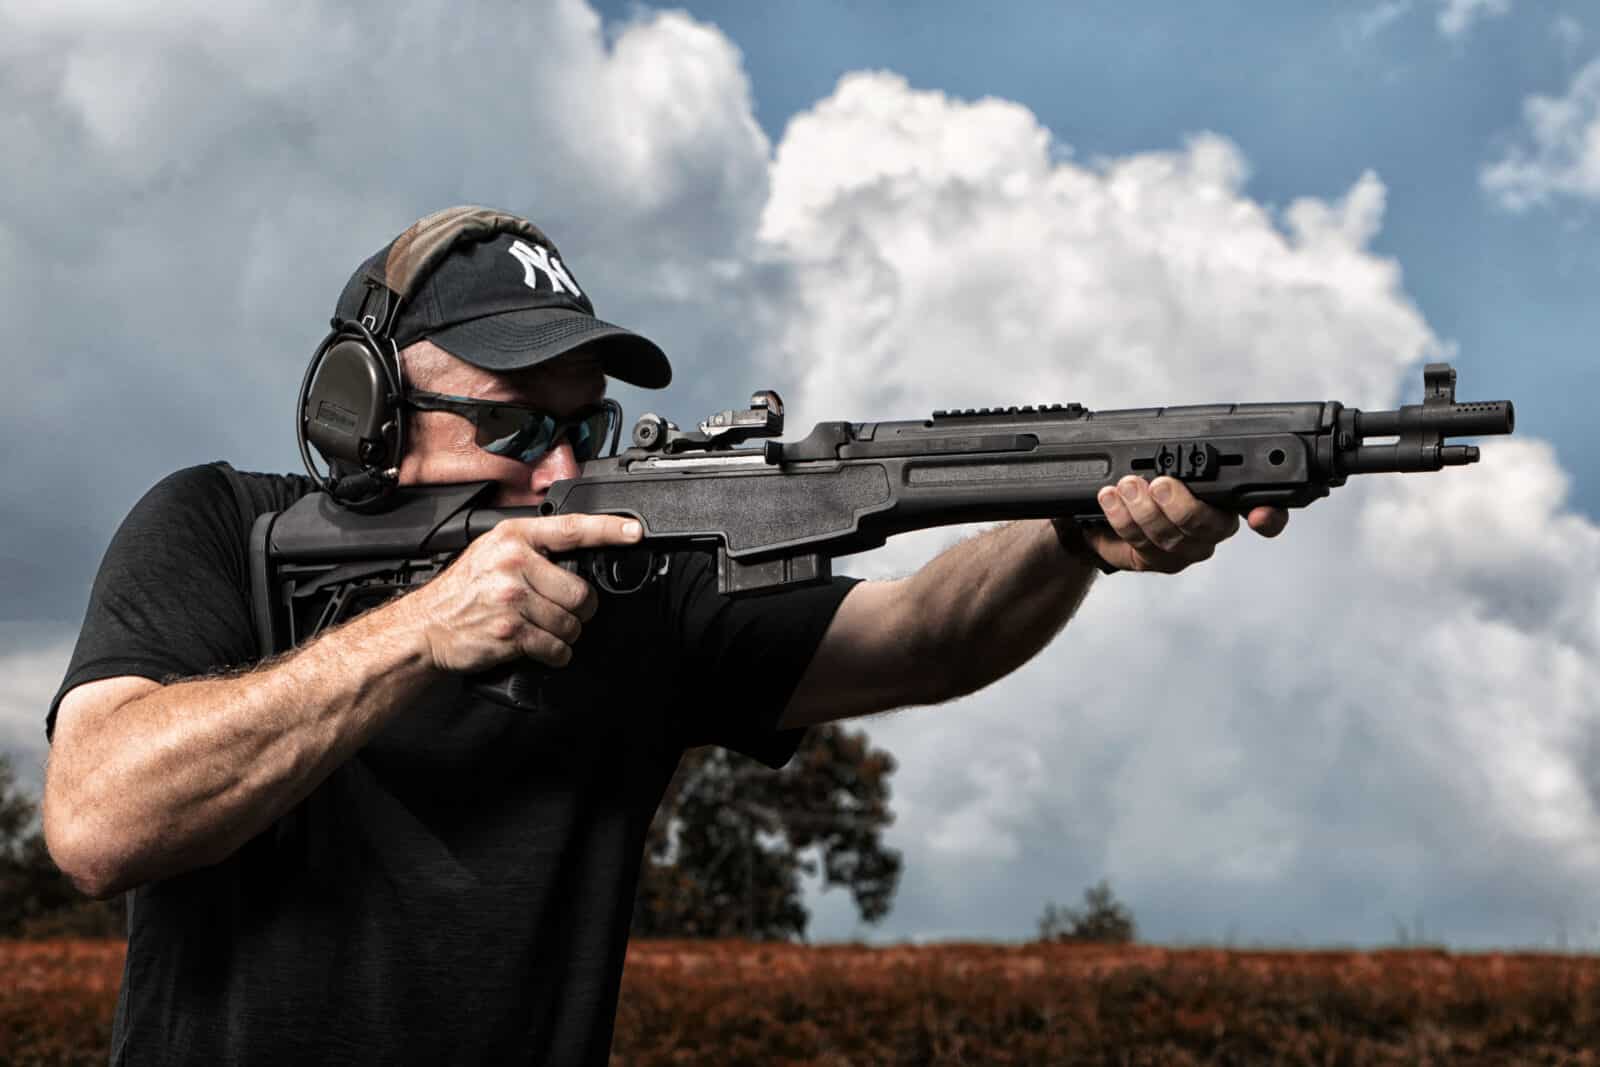 With a red dot sight, the SOCOM 16 makes for an excellent home defense rifle that can reach farther out if circumstances require it.